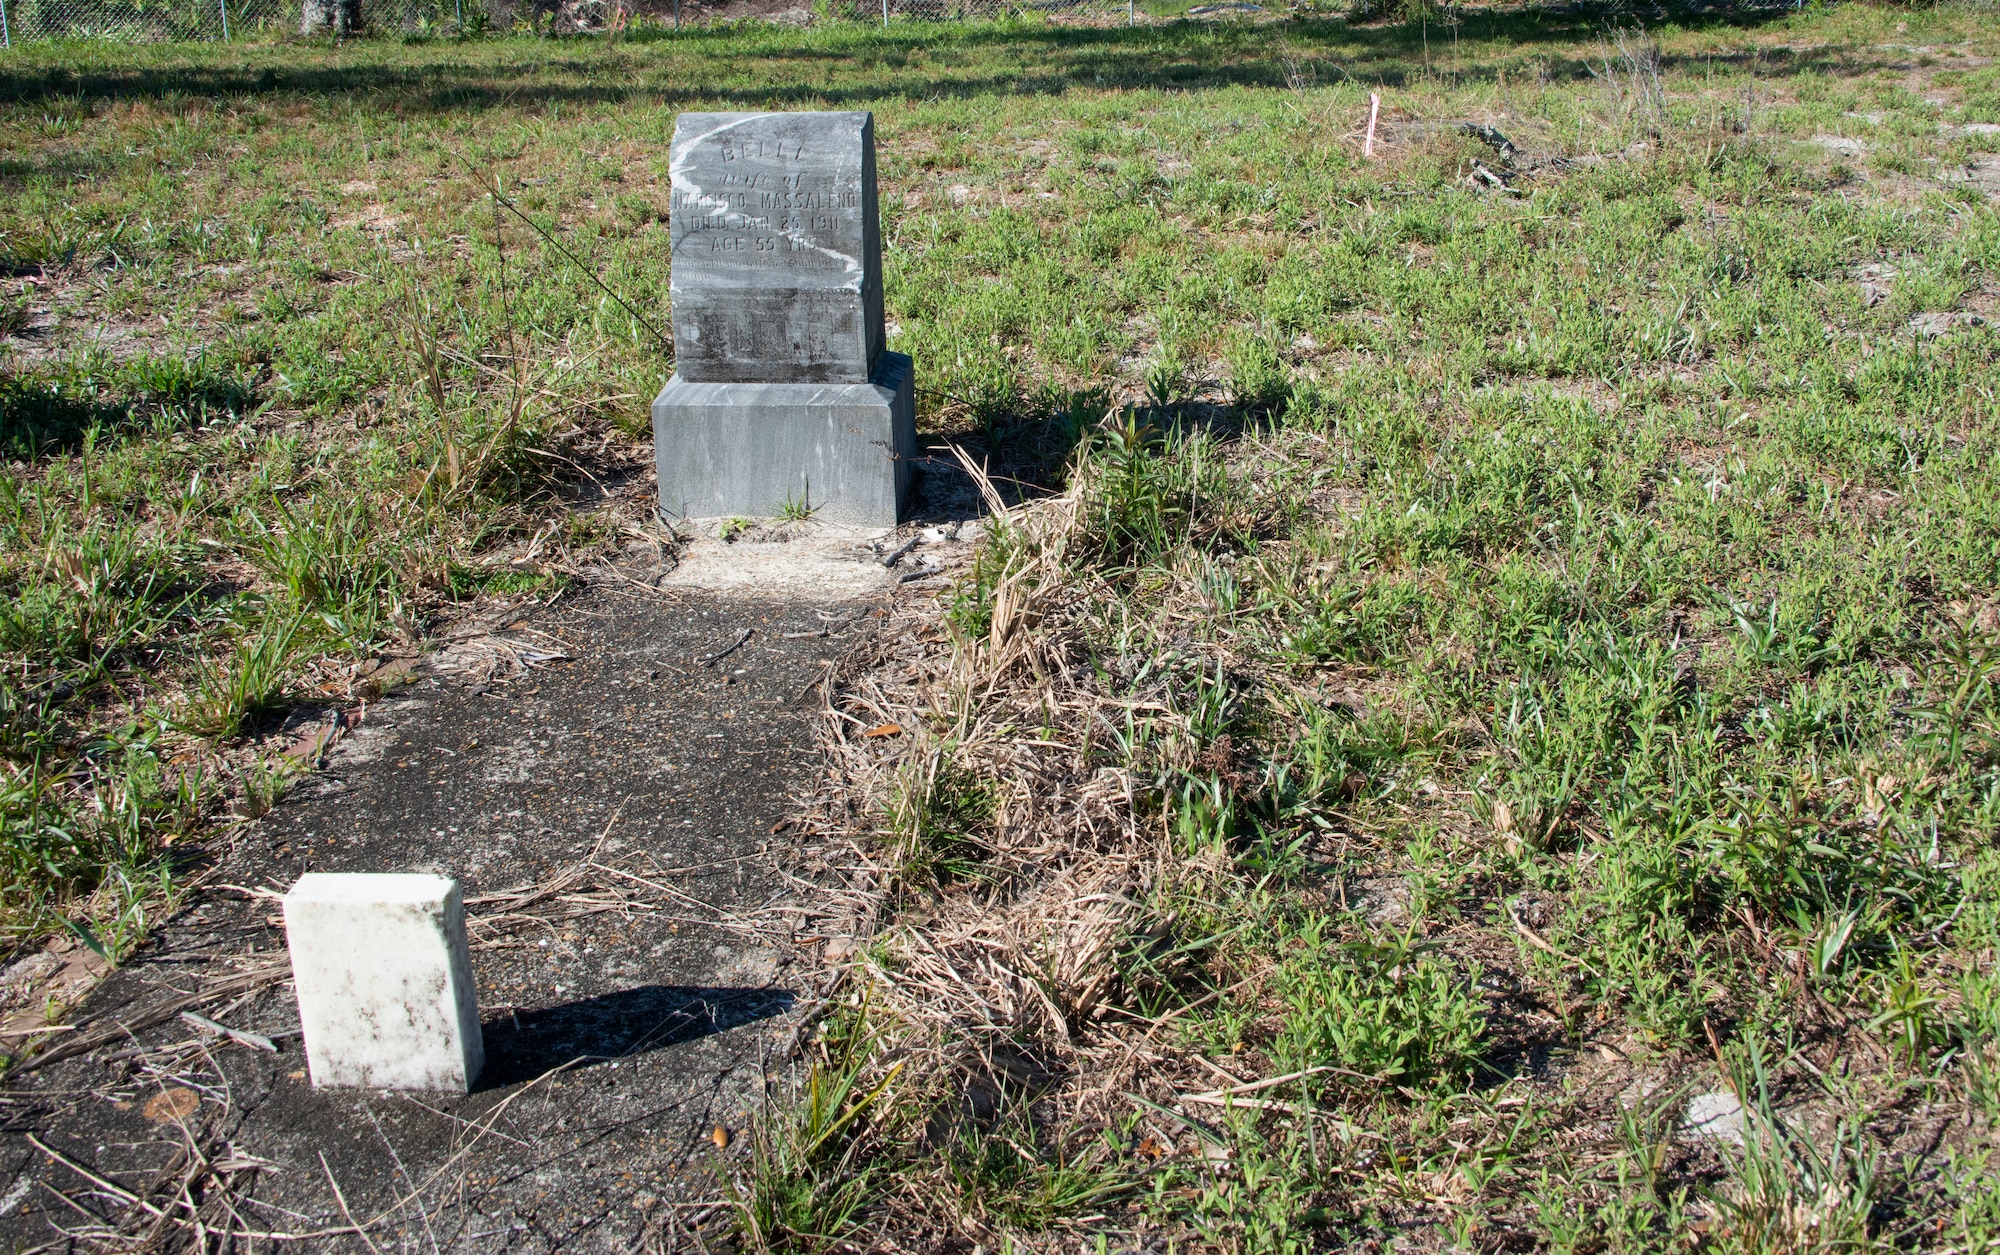 Pictured is one of the few marked graves in Massalina Cemetery at Tyndall Air Force Base, Florida, Feb. 28, 2020. Belle Massalina was buried in 1911. (U.S. Air Force photo by 2nd Lt. Kayla Fitzgerald)